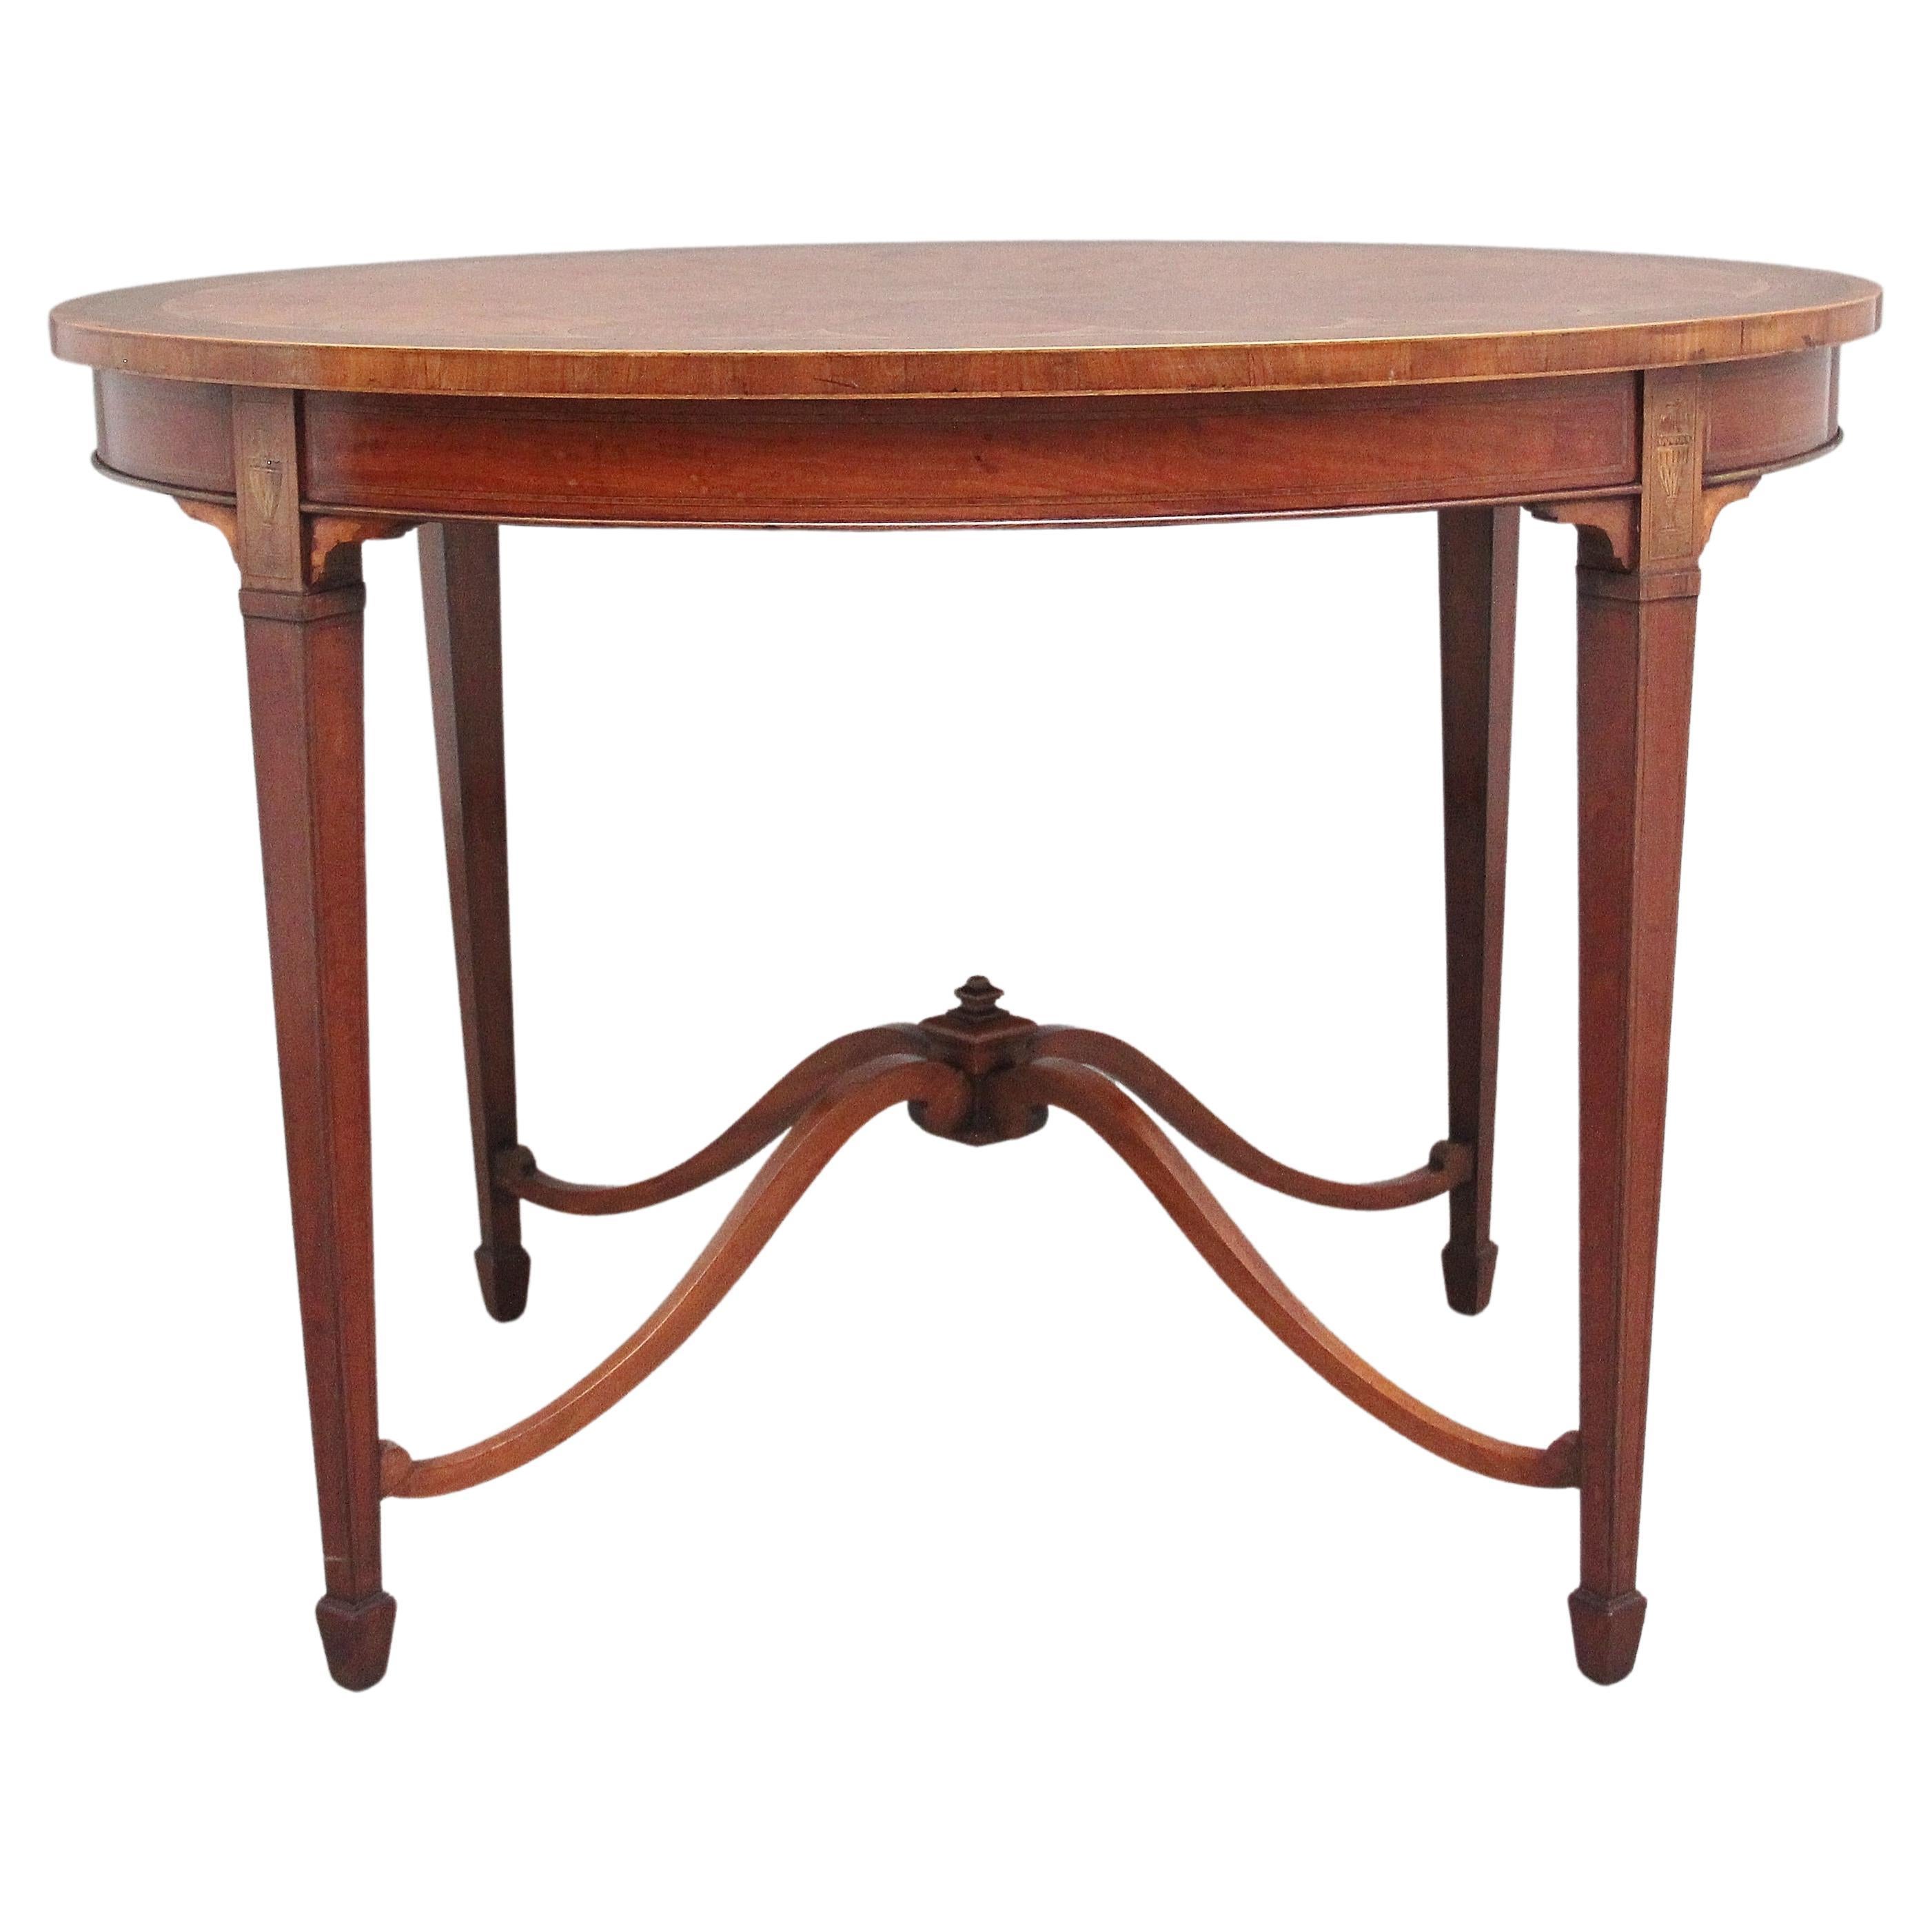 19th Century Inlaid Satinwood Table For Sale